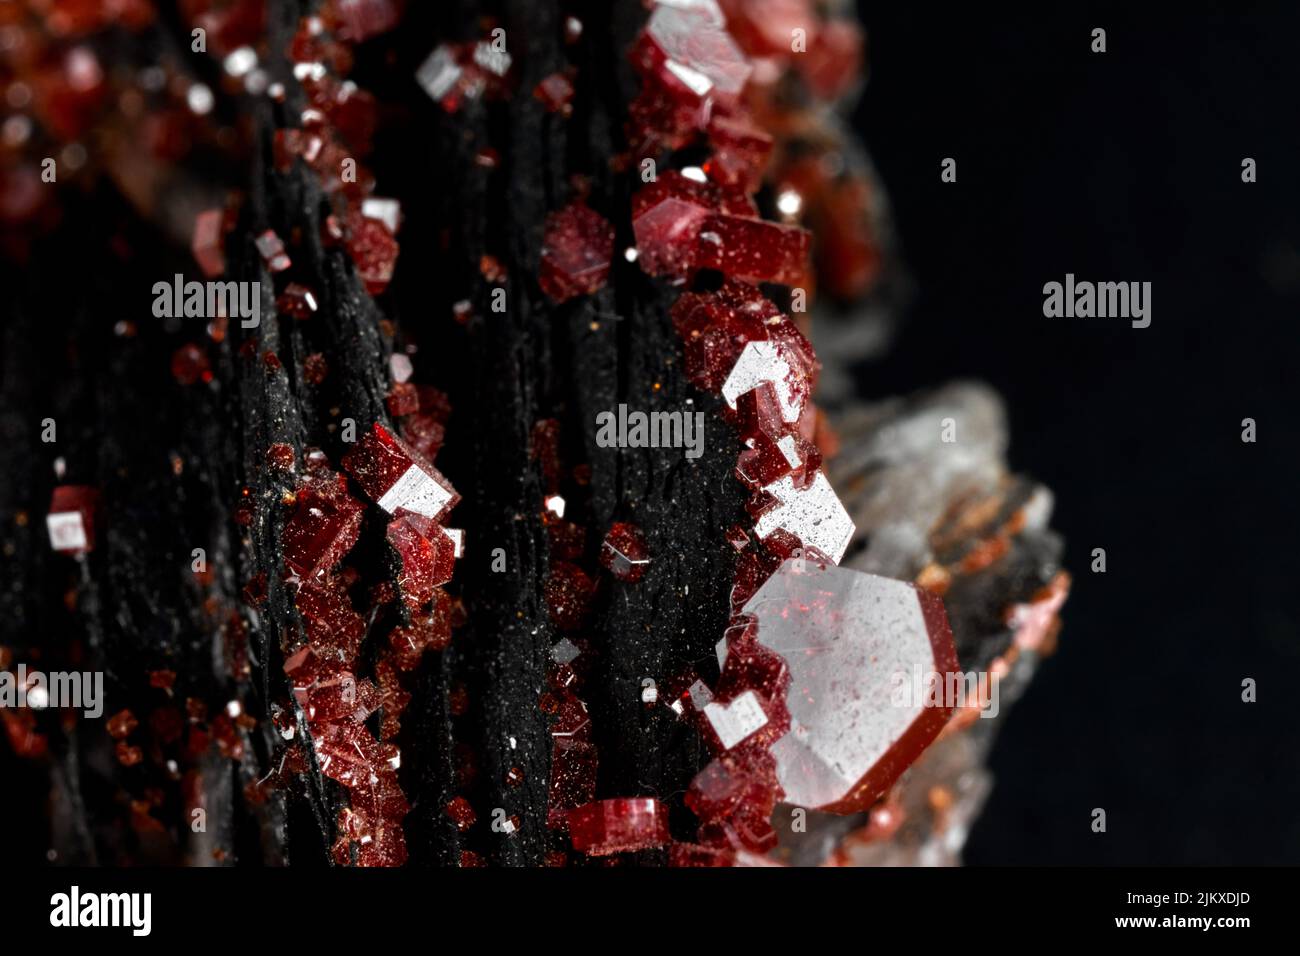 A closeup of small rare red minerals on a black blurred background Stock Photo